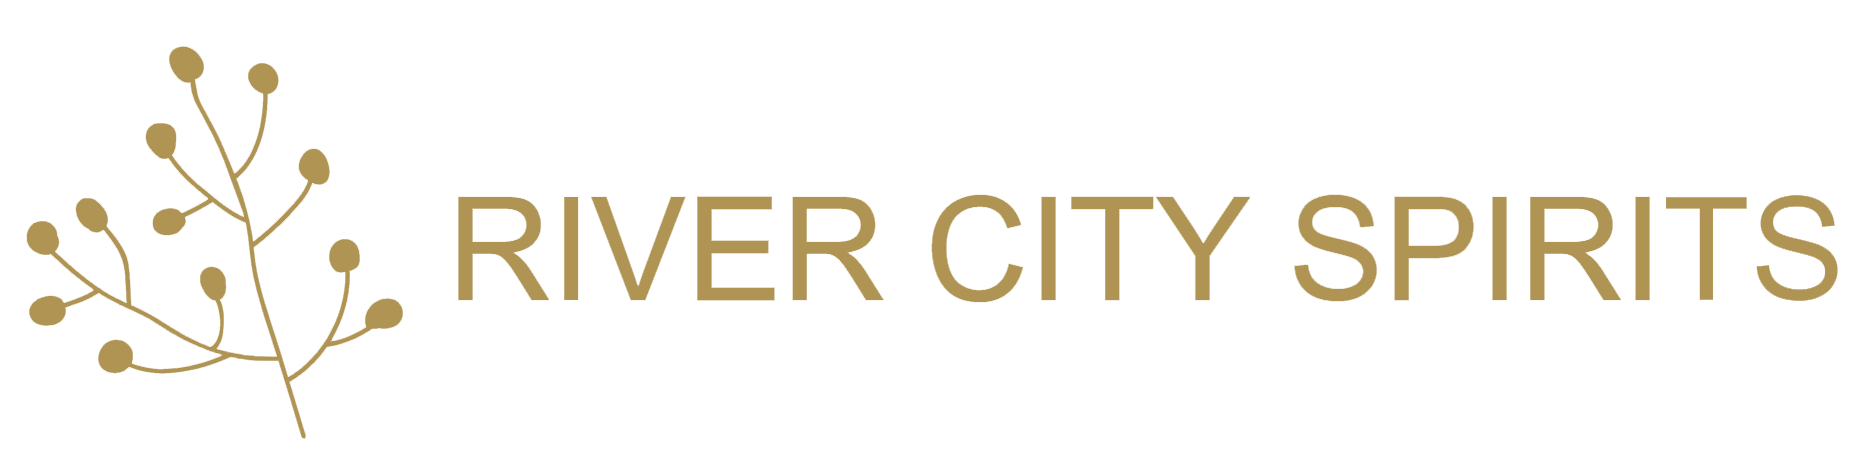 River City Spirits Logo - Mobile Bartending and Catering Services